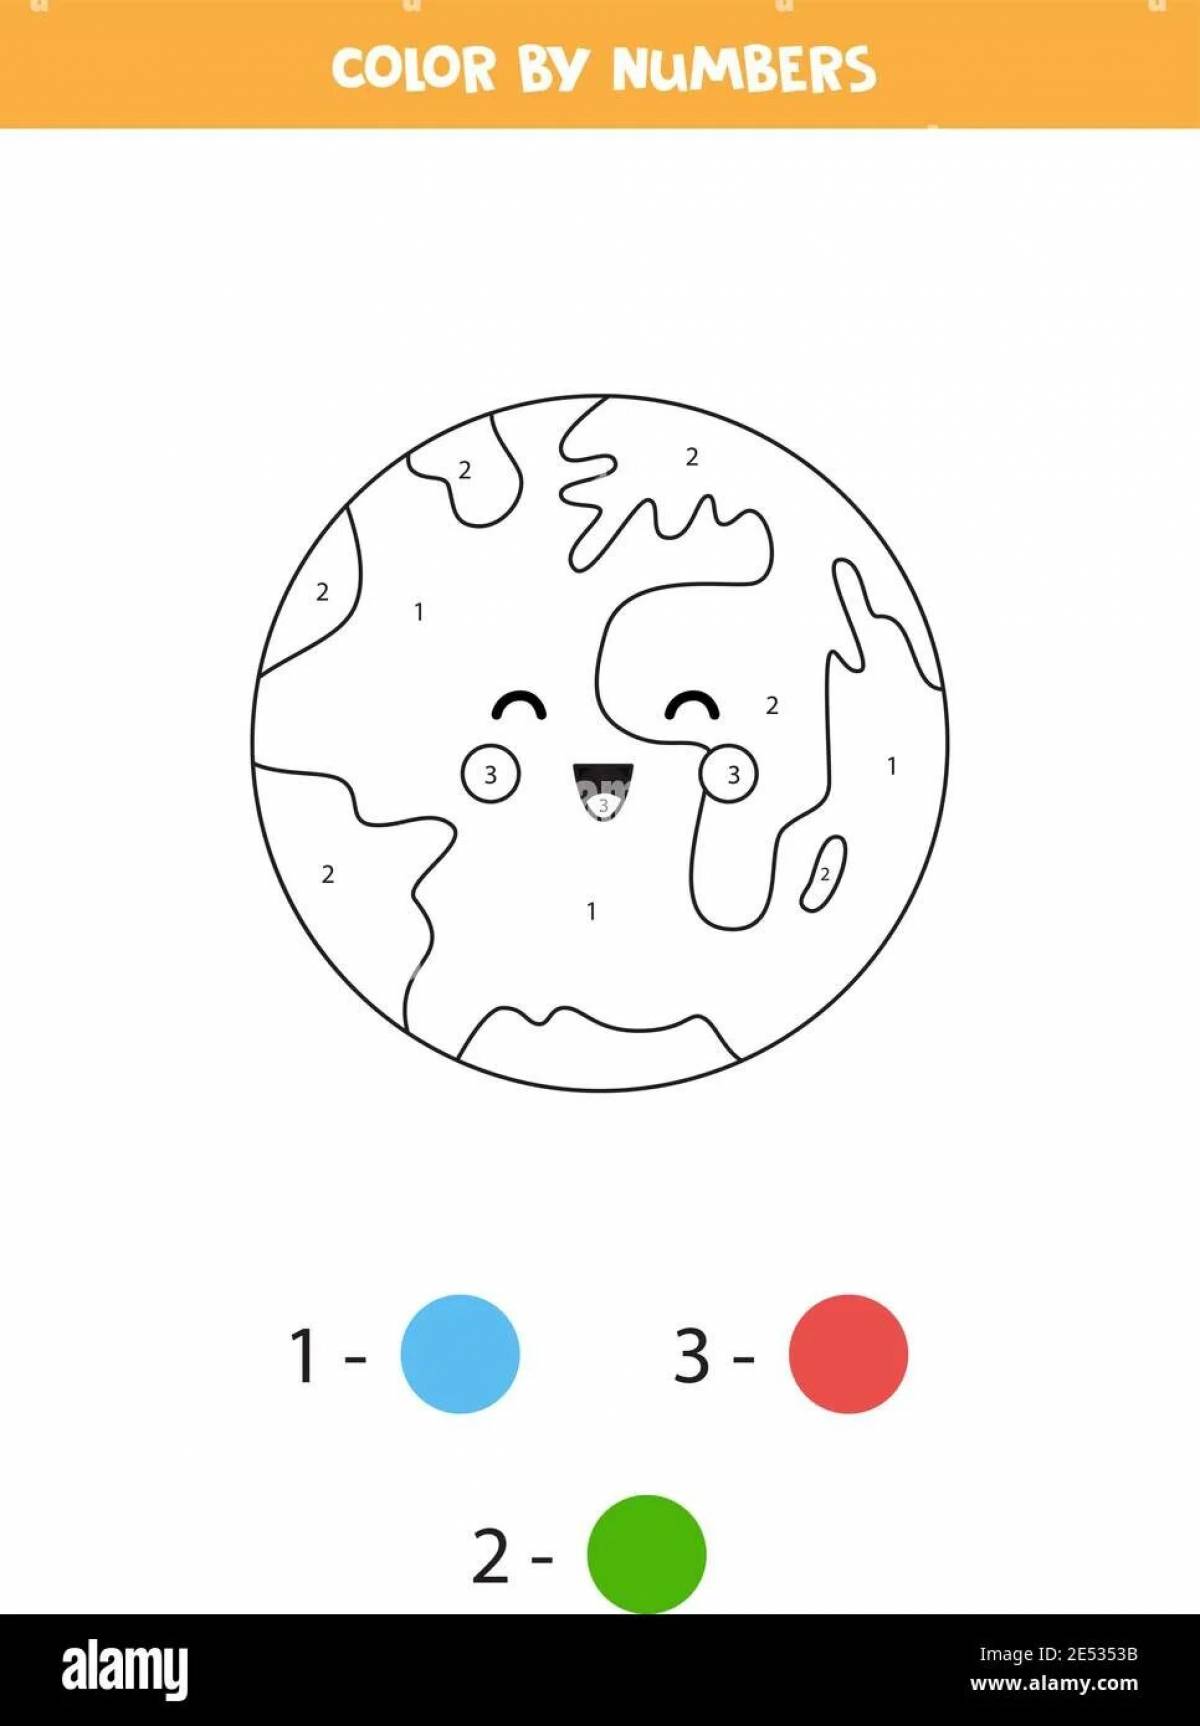 Color planet by numbers #5